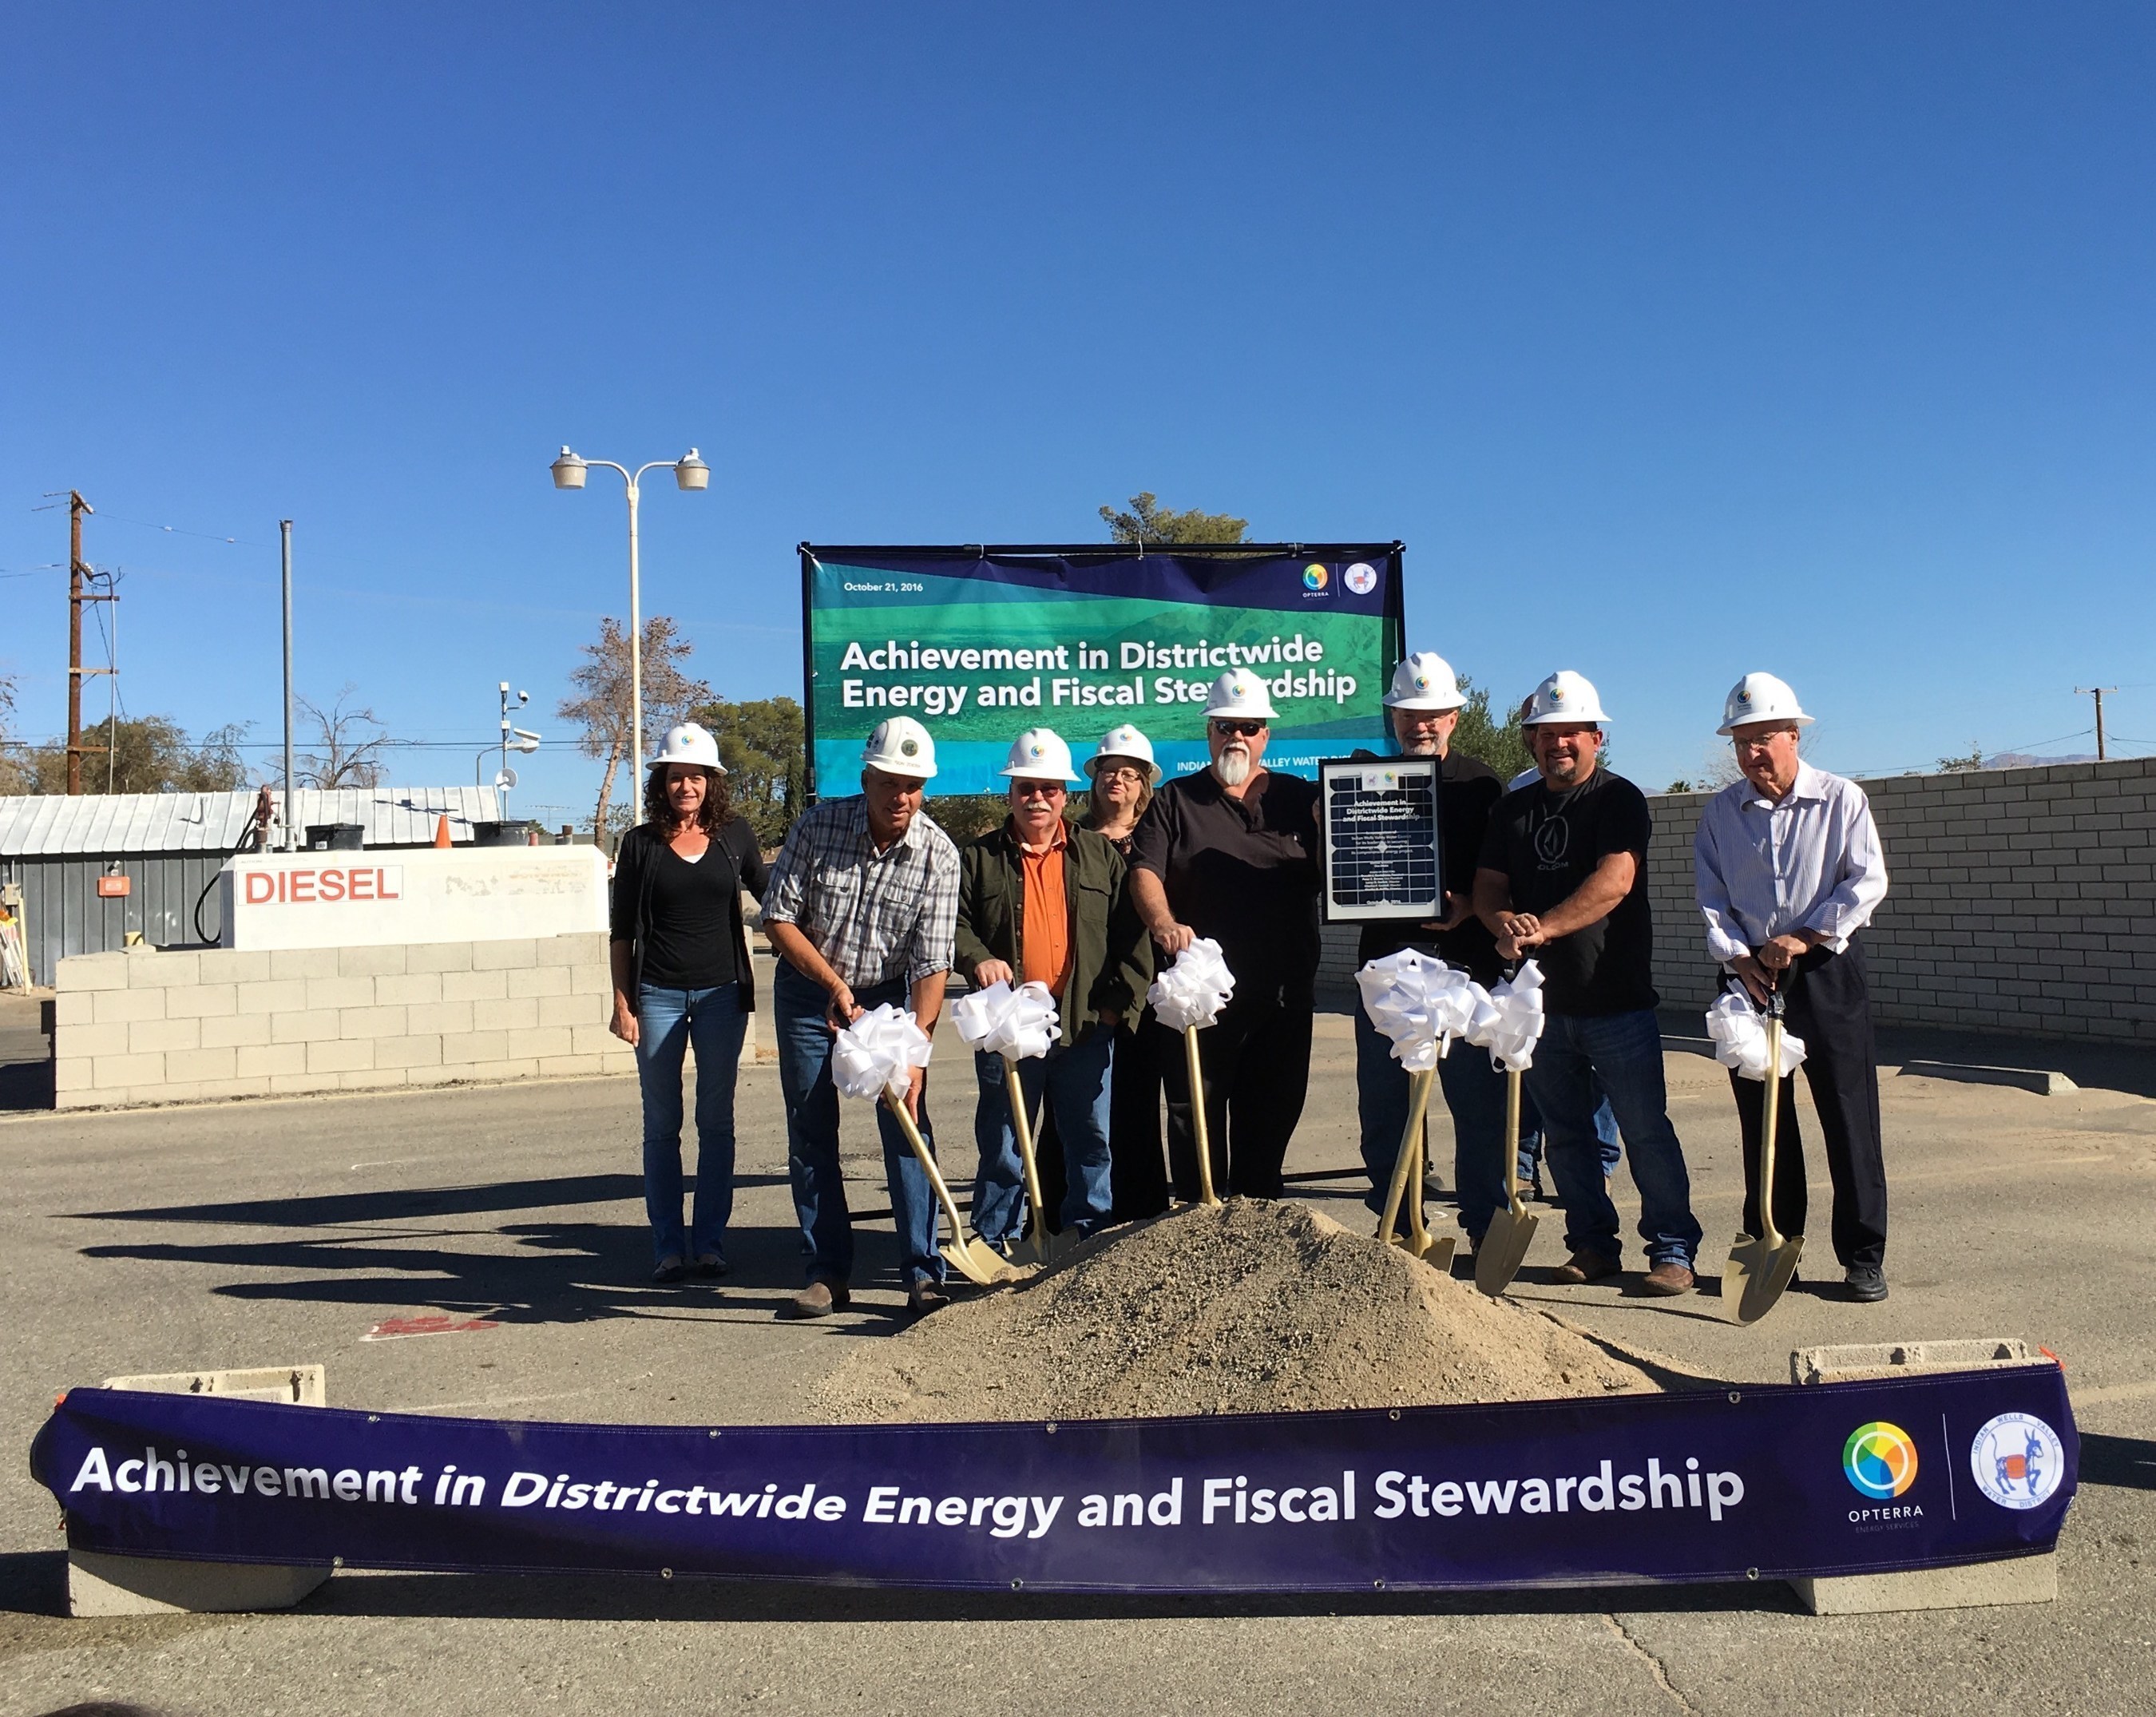 Leaders from the Indian Wells Valley Water District break ground on the beginning of a comprehensive energy efficiency and solar program with OpTerra Energy Services. The community celebration was held on Friday, October 21st, 2016.